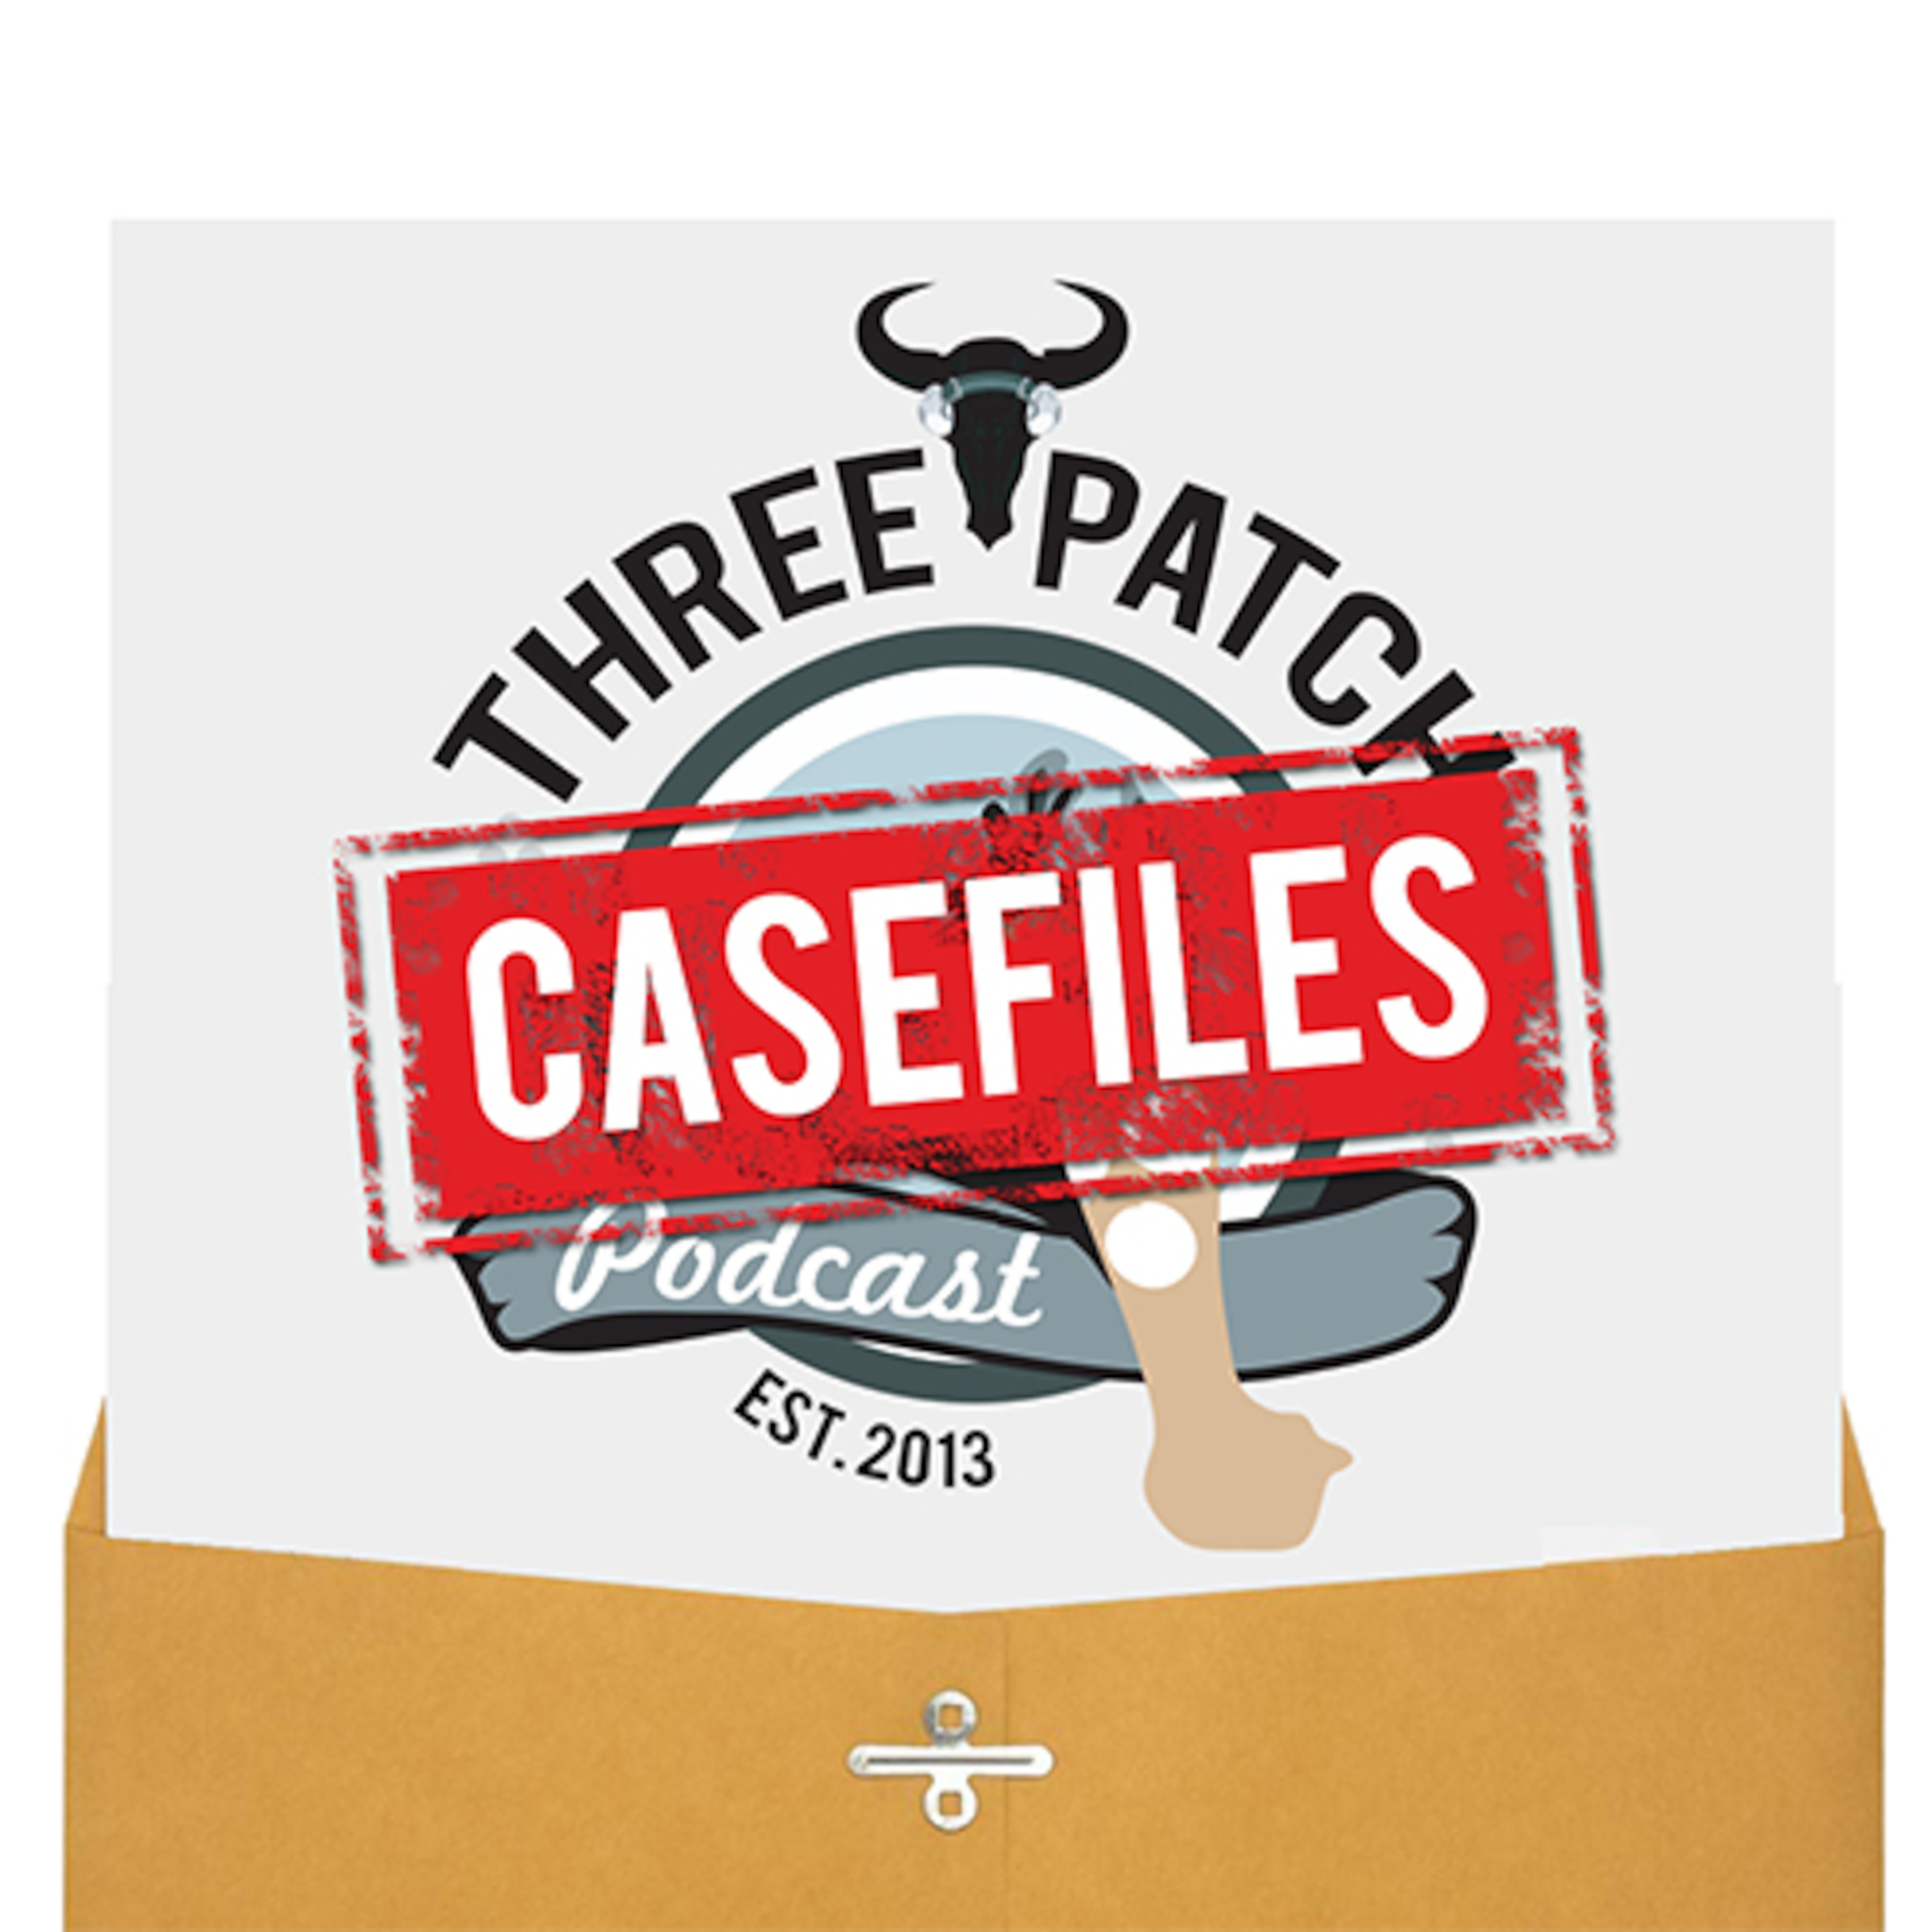 Casefiles of the Three Patch Podcast